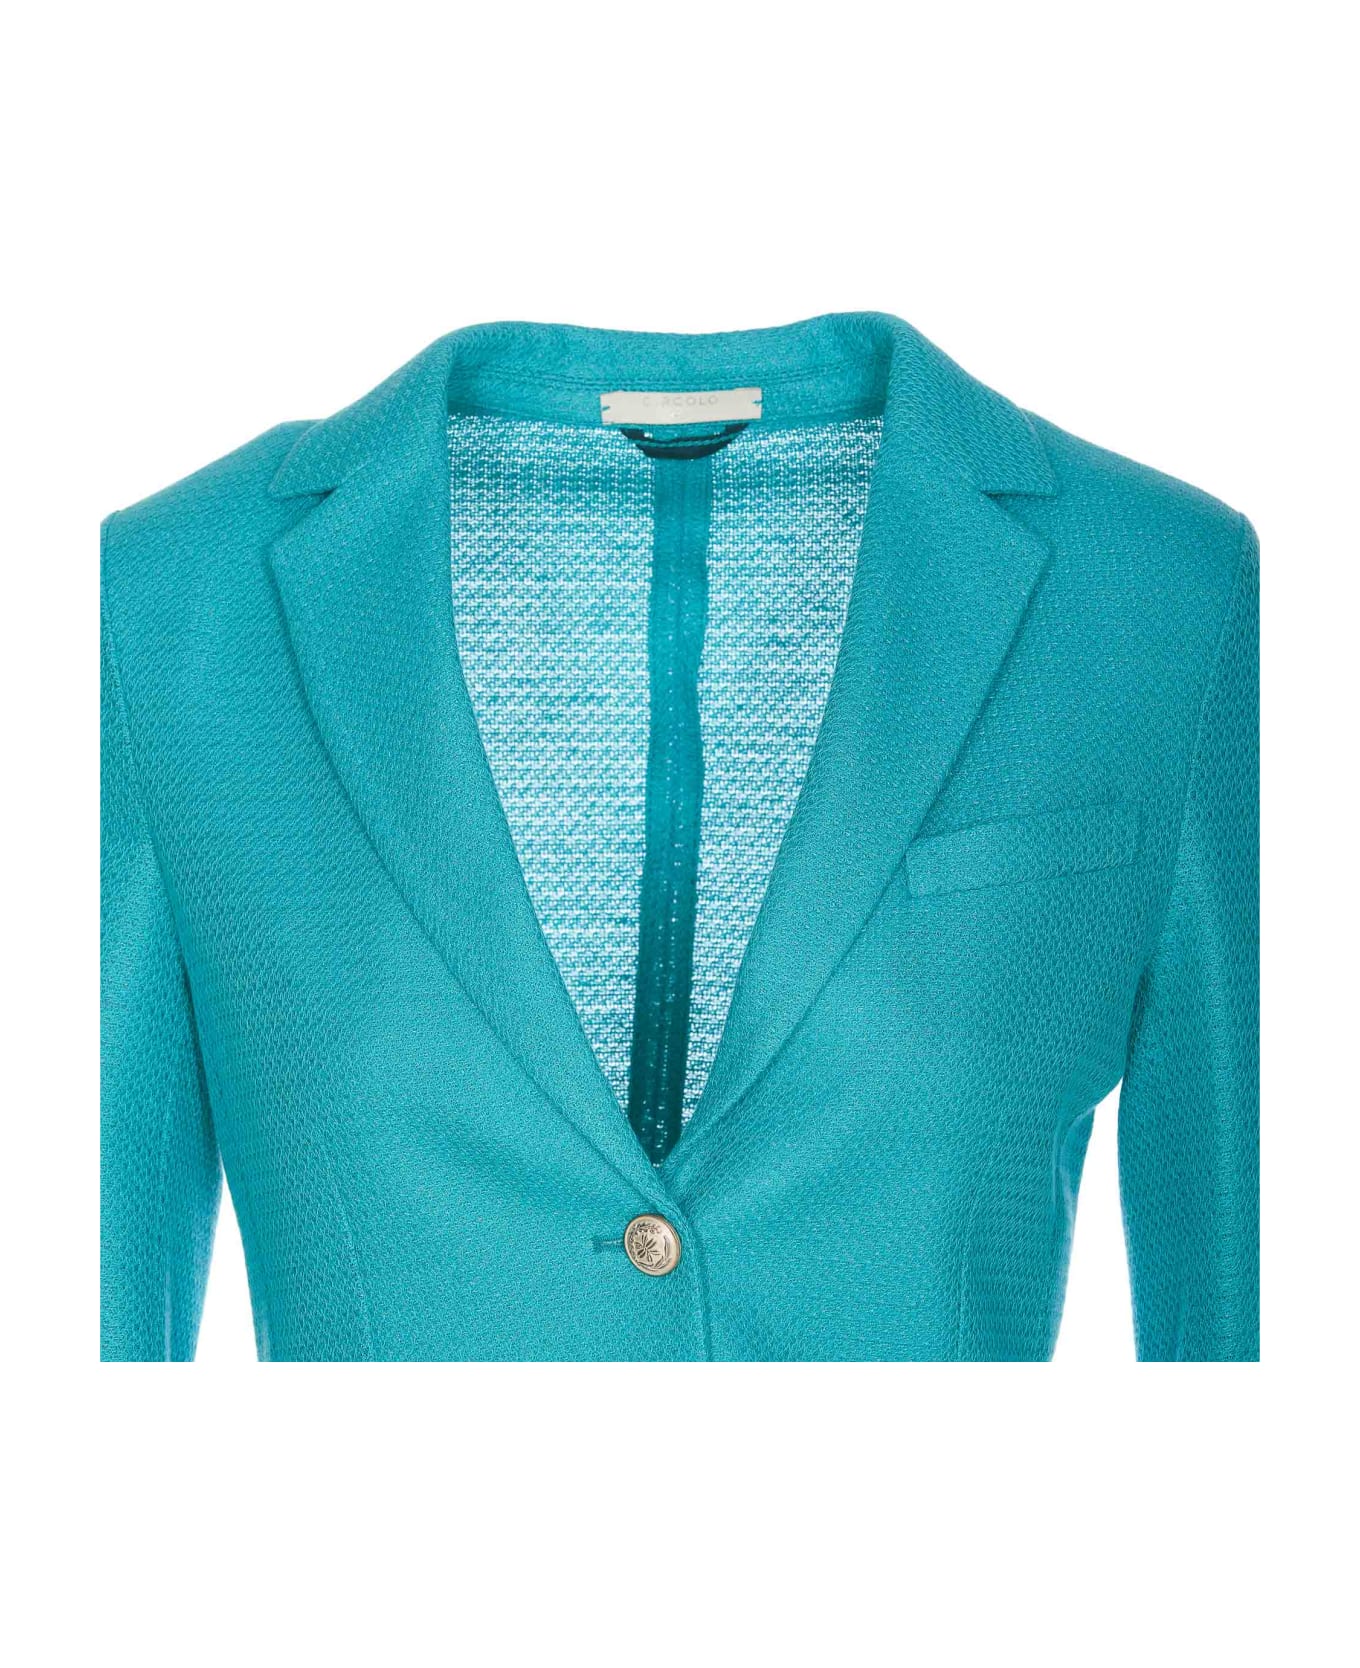 Circolo 1901 Single Breasted Buttons Jacket - Blue